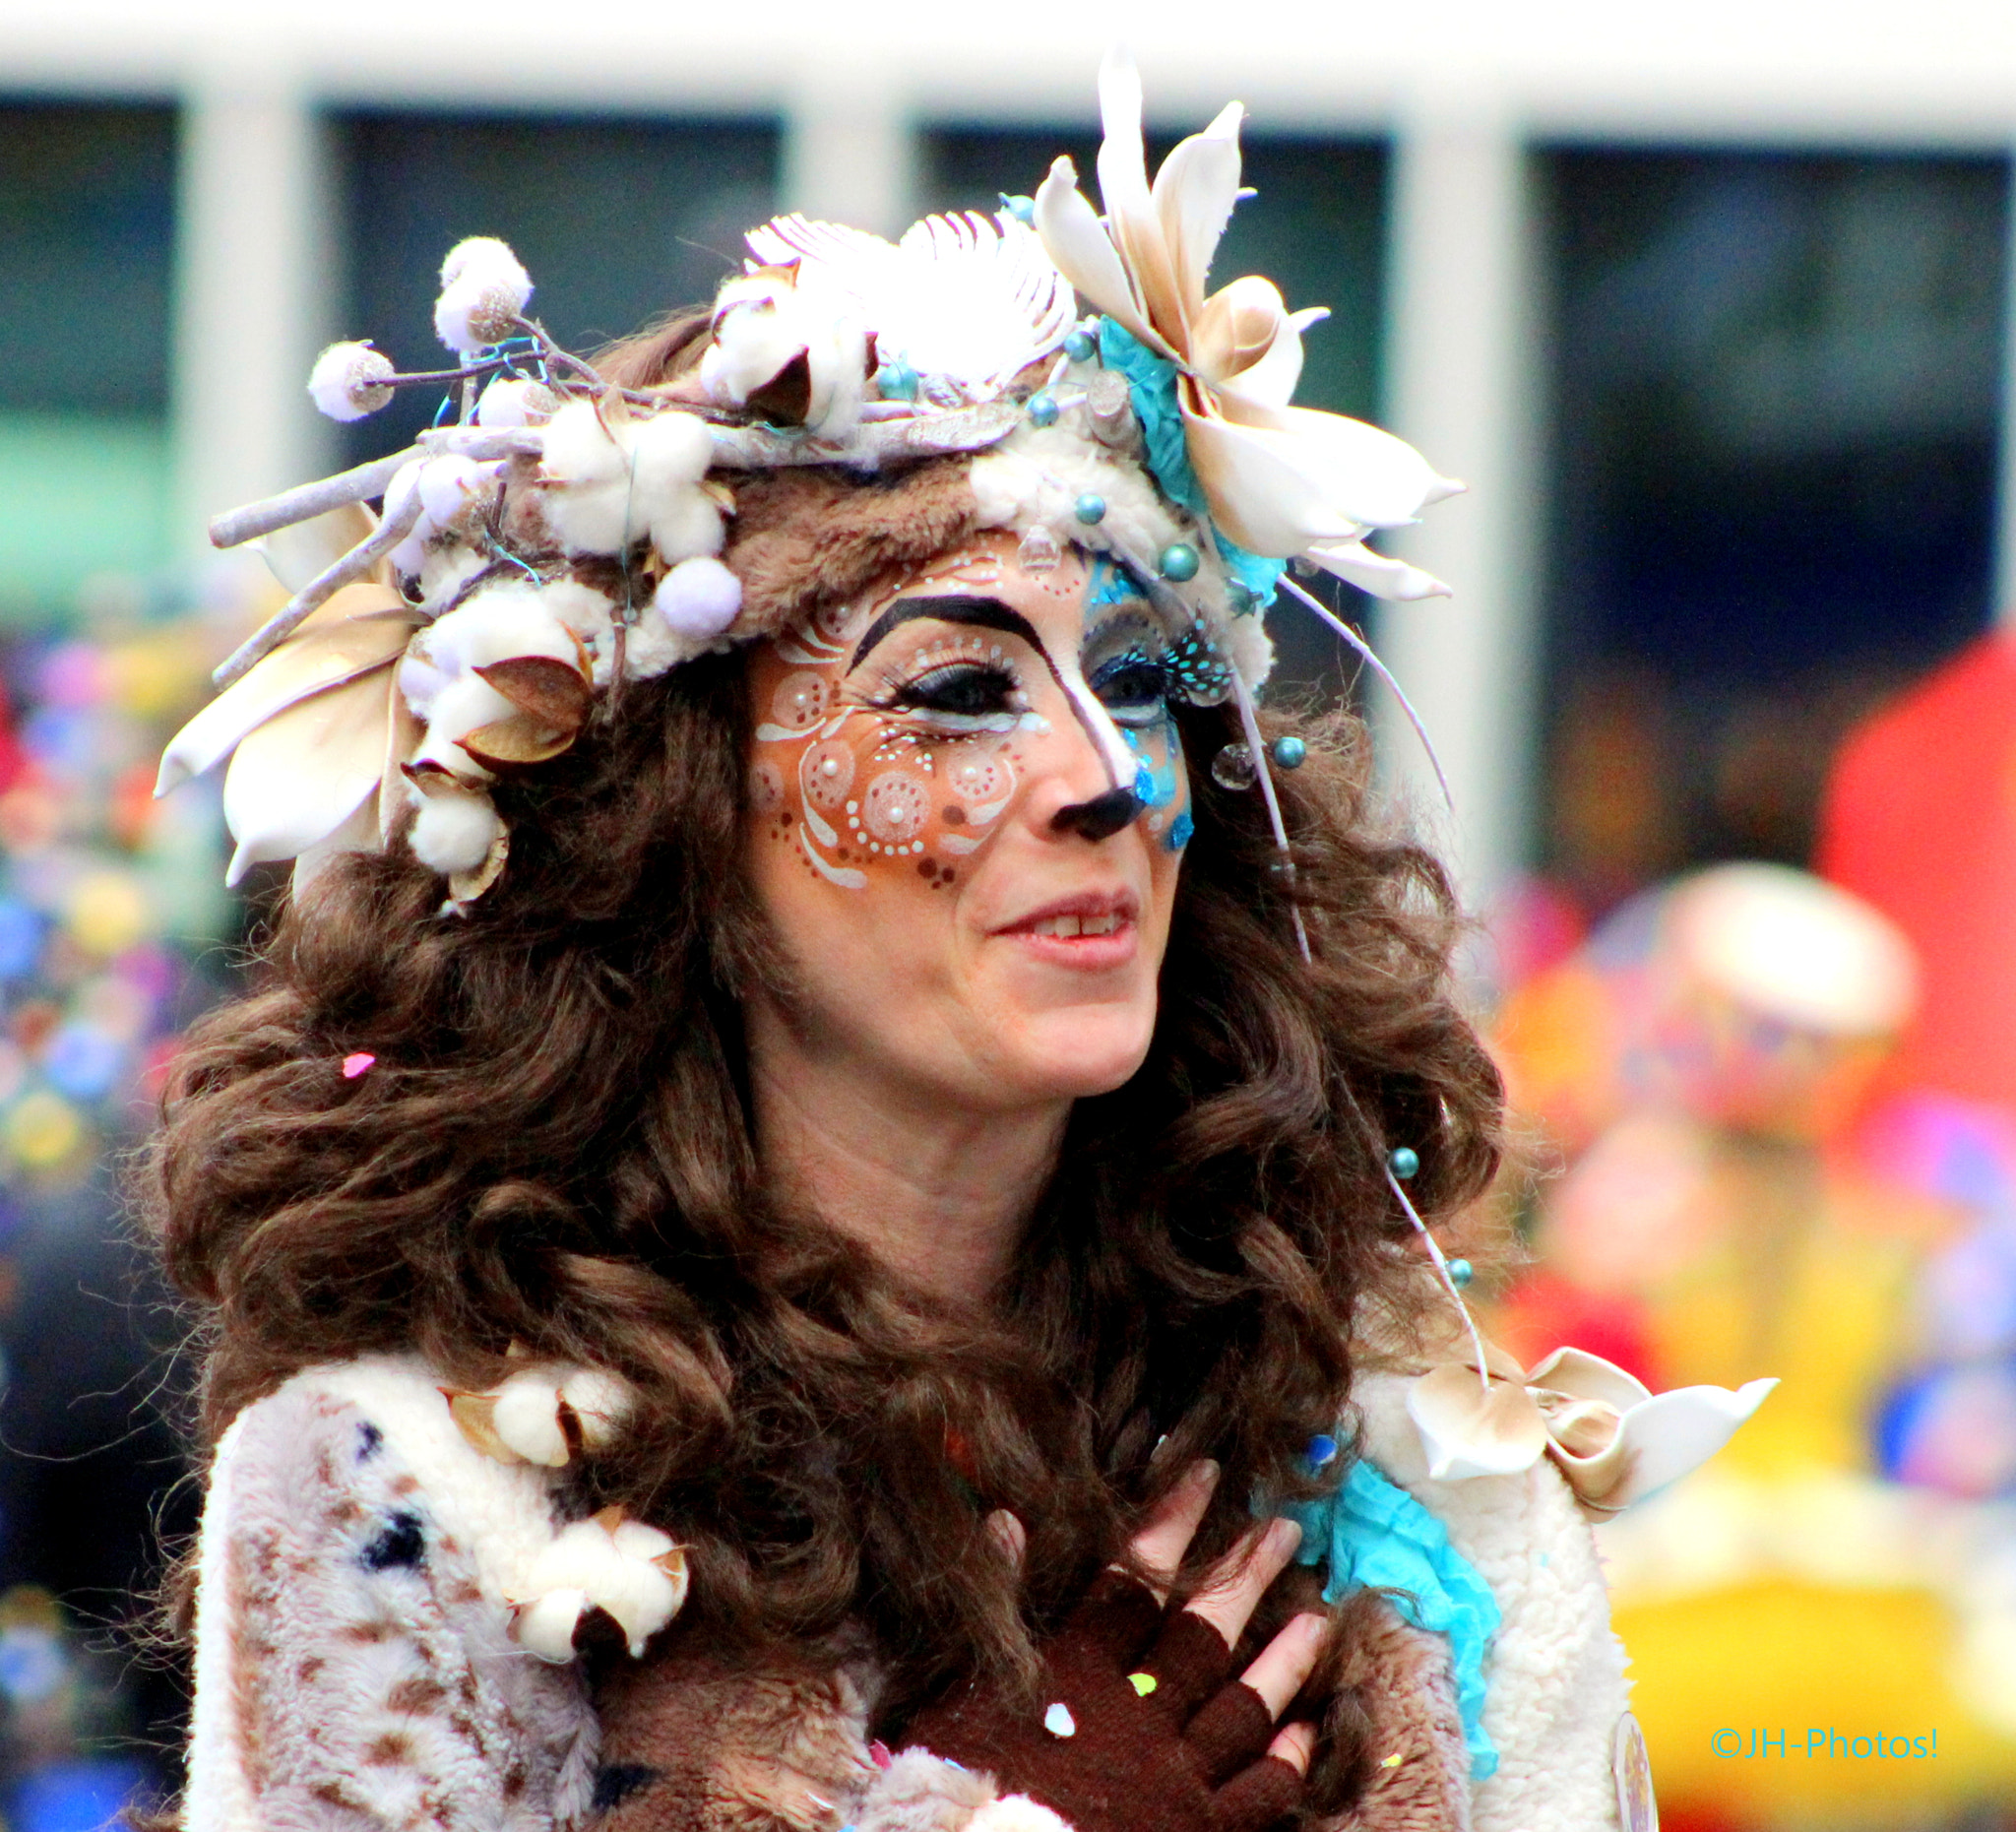 EF75-300mm f/4-5.6 sample photo. Colorful carnaval photography